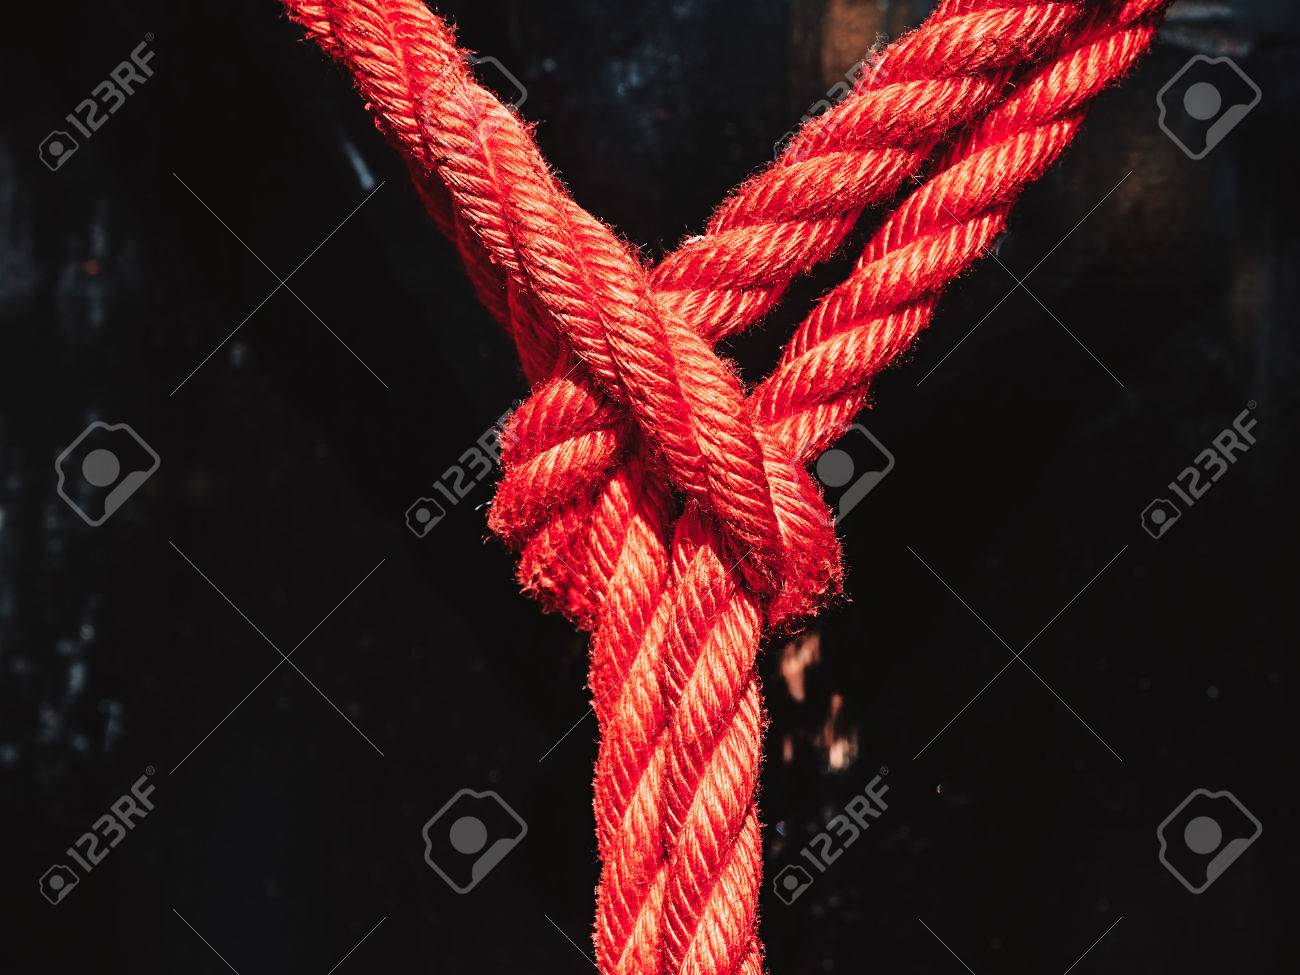 Knot From Red Rope Of Taiko Drums O Kedo Close Up Background